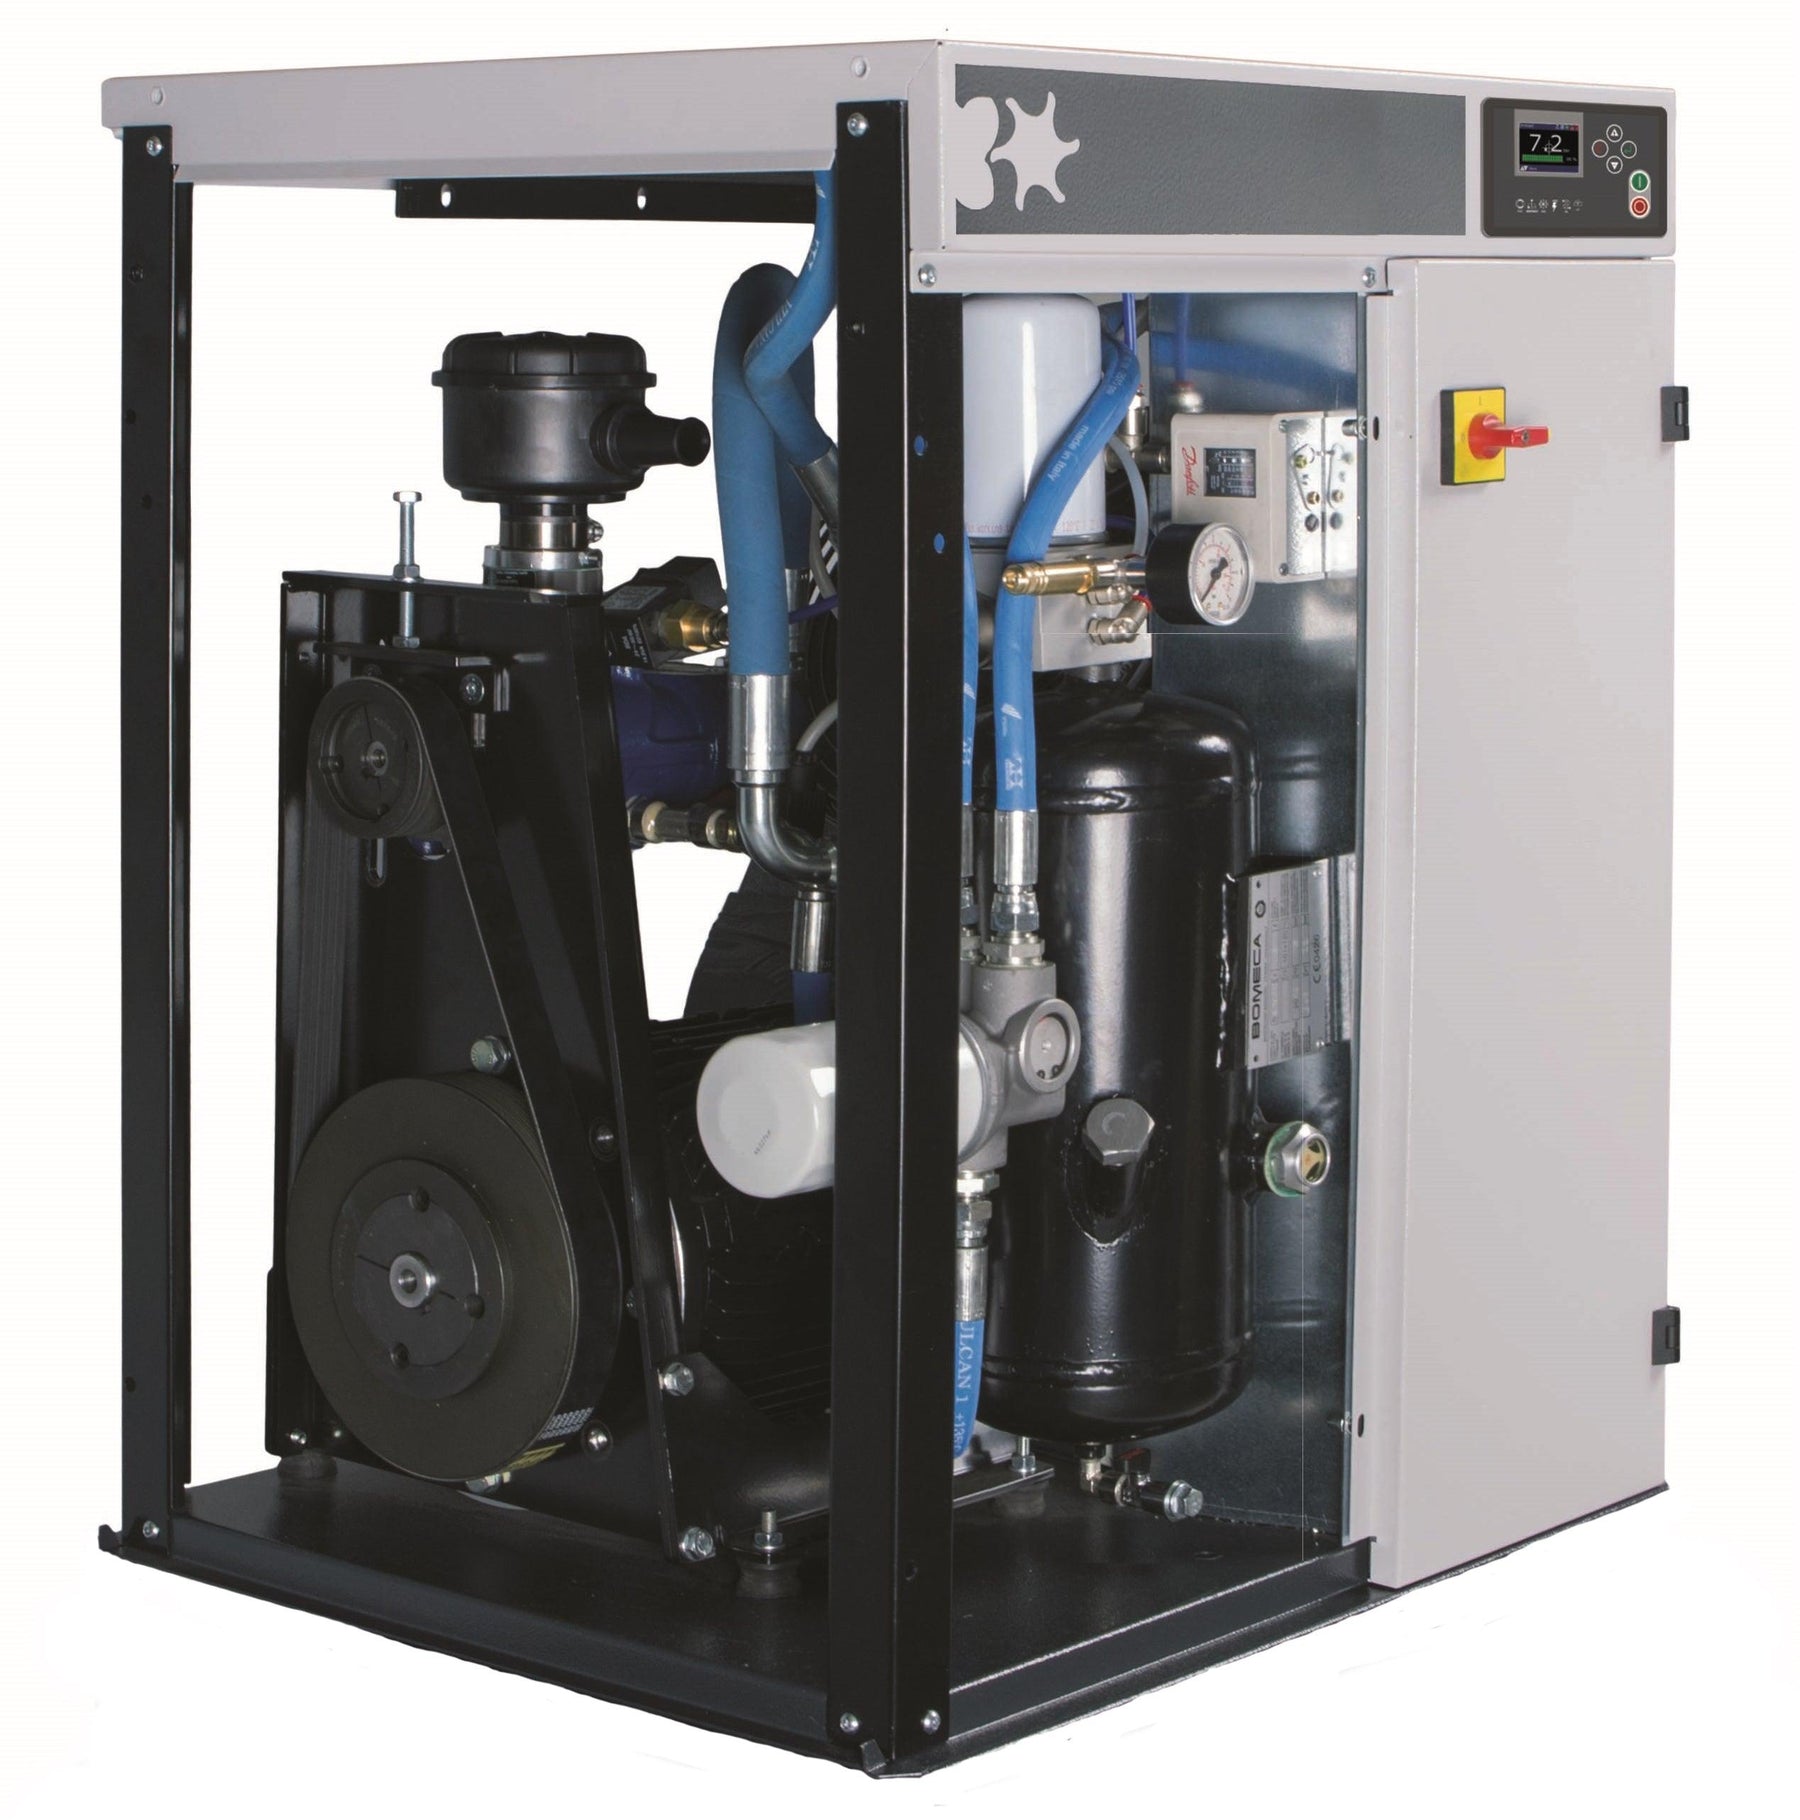 Screw compressor power 11 kW + 270 l tank + integrated refrigeration cycle dryer - Weagorà